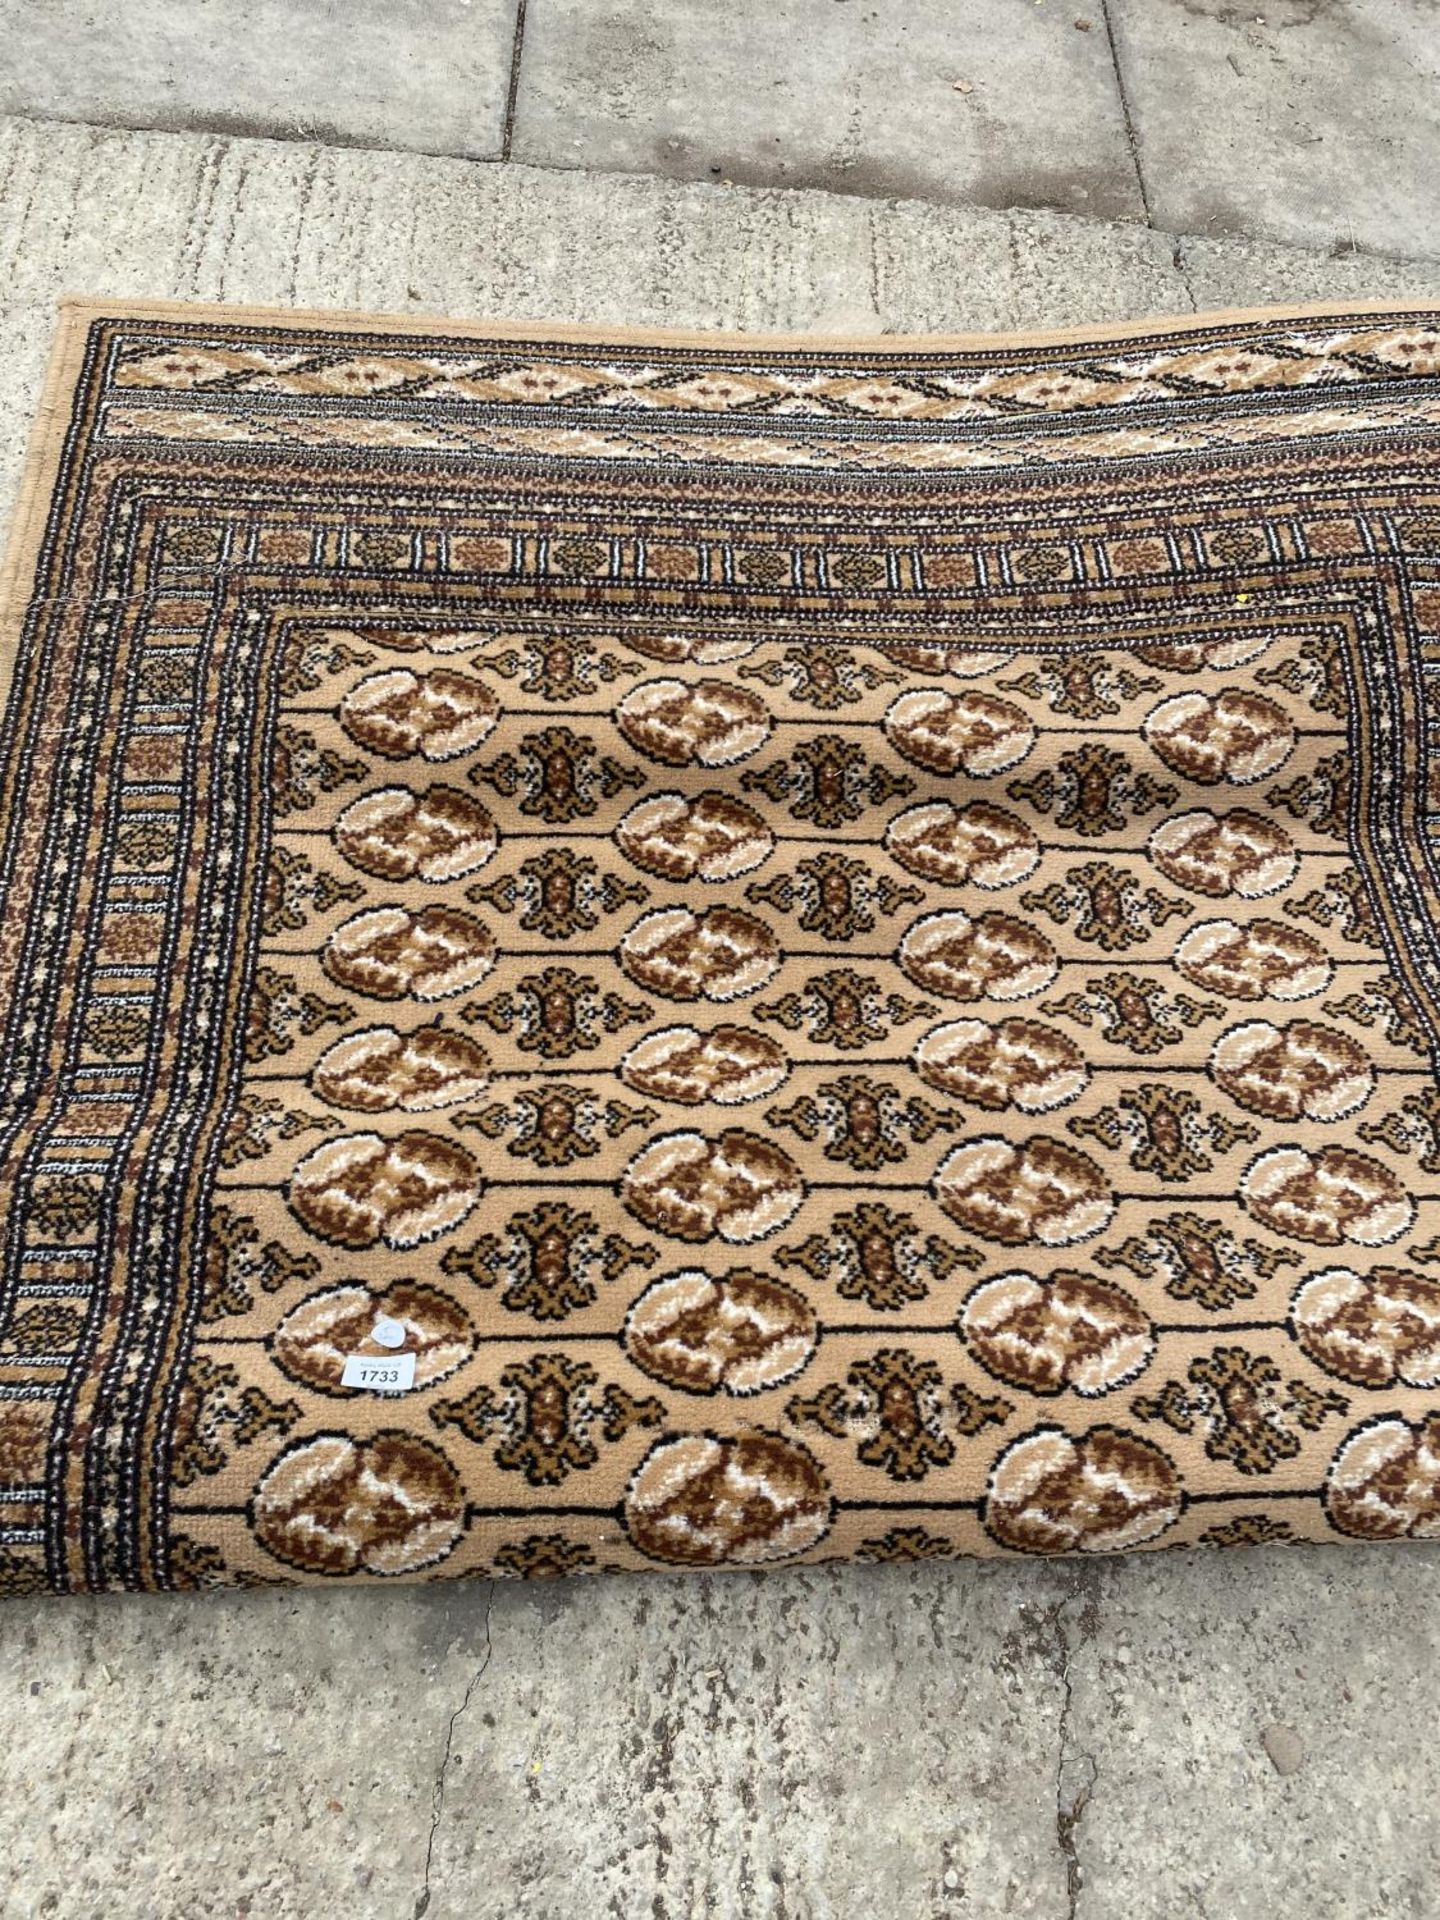 TWO BROWN PATTERNED RUGS - Image 2 of 3